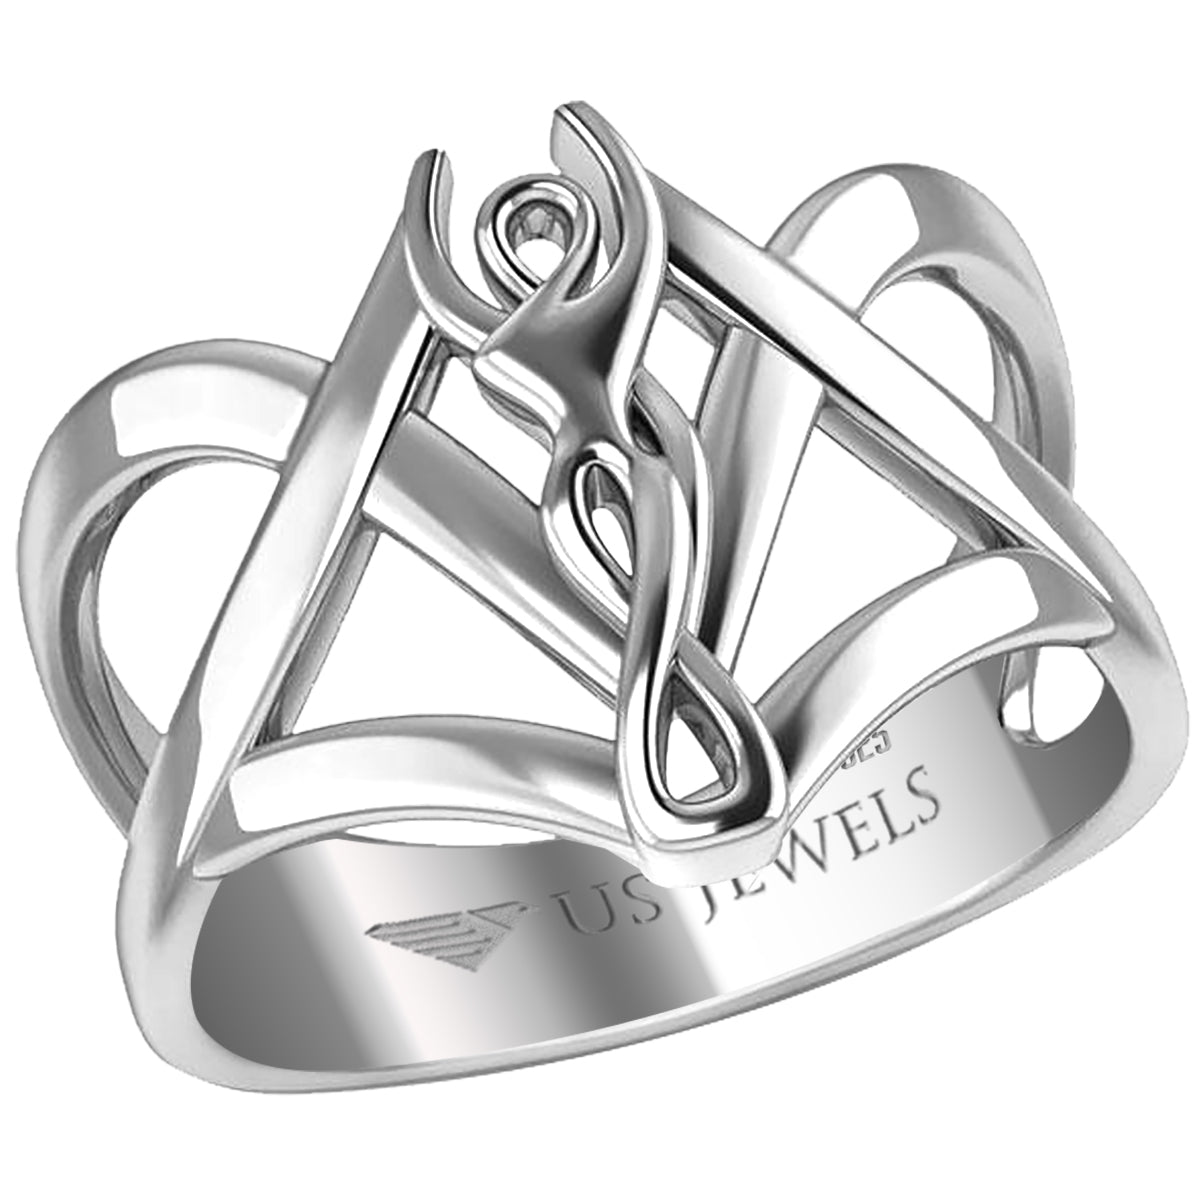 Ladies 925 Sterling Silver Goddess Ring - US Jewels